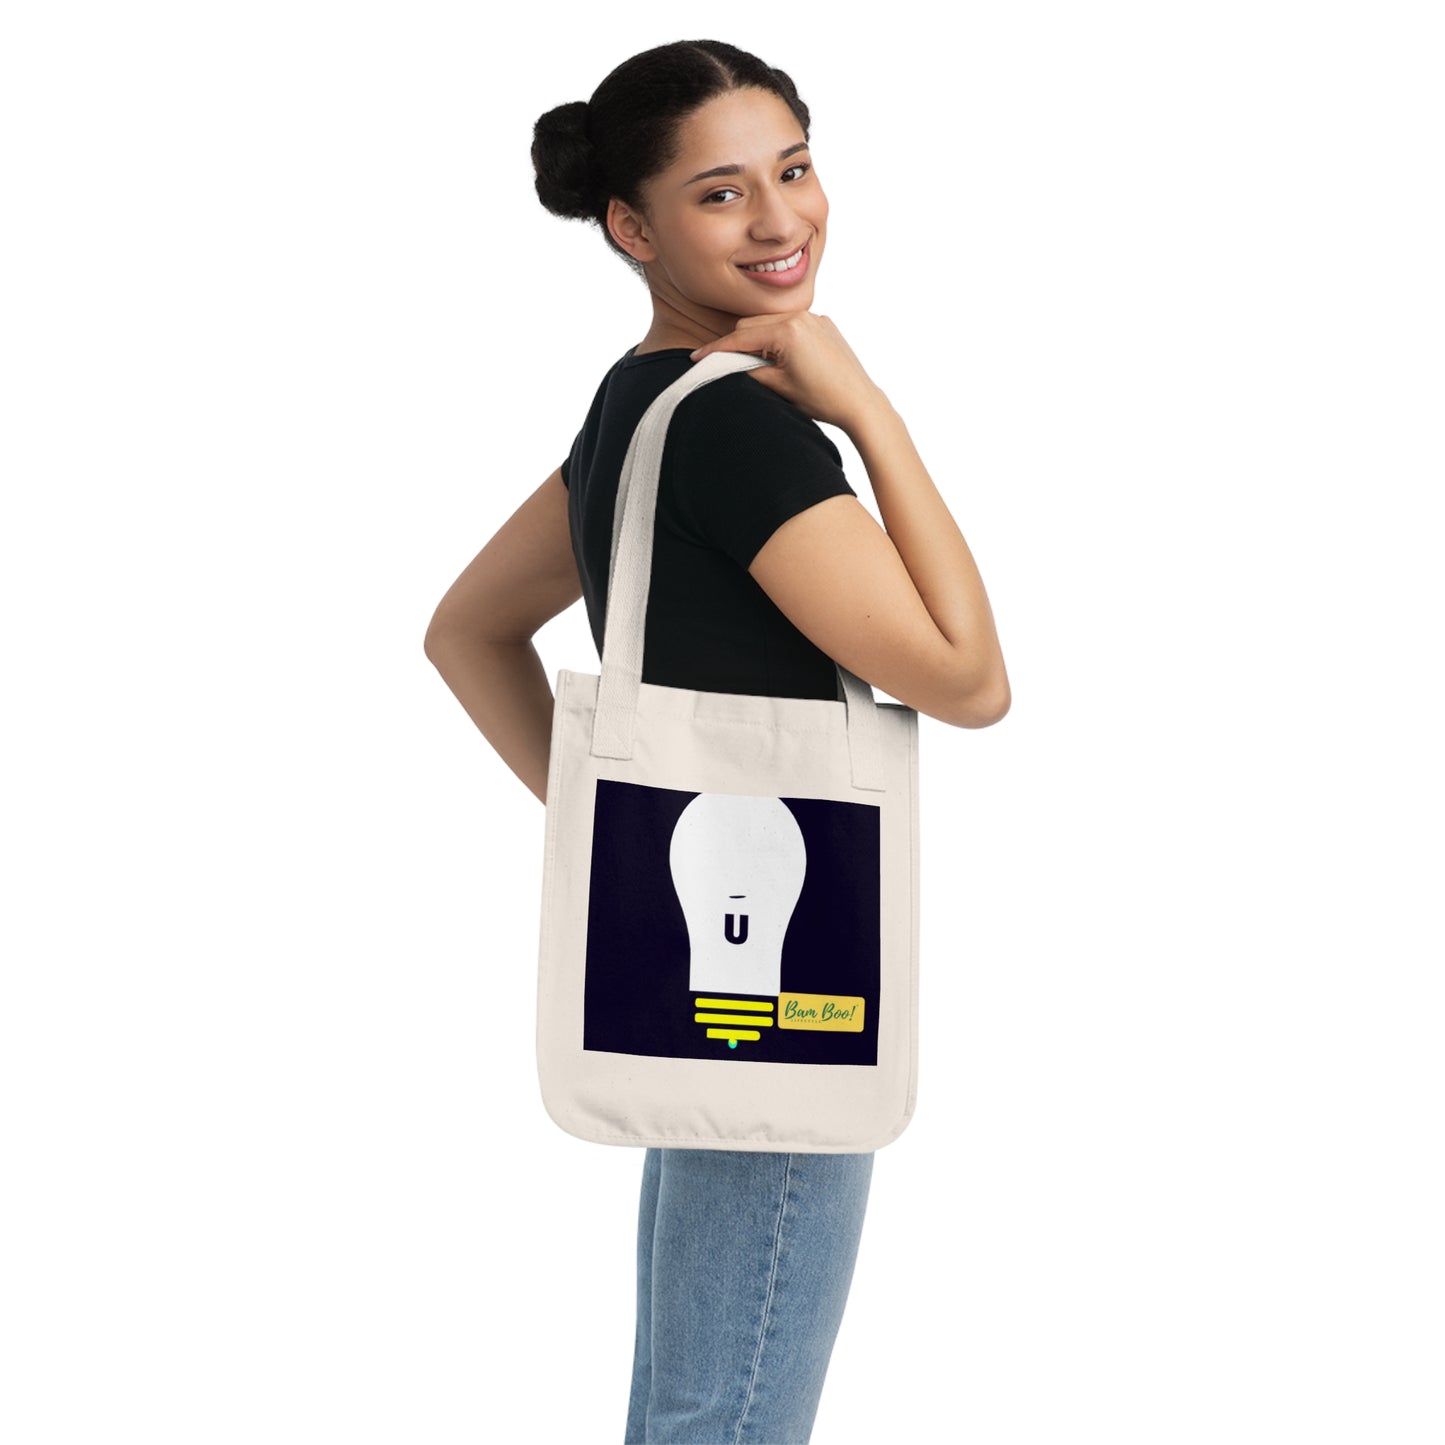 "A Captured Memory: An Interactive Artpiece" - Bam Boo! Lifestyle Eco-friendly Tote Bag